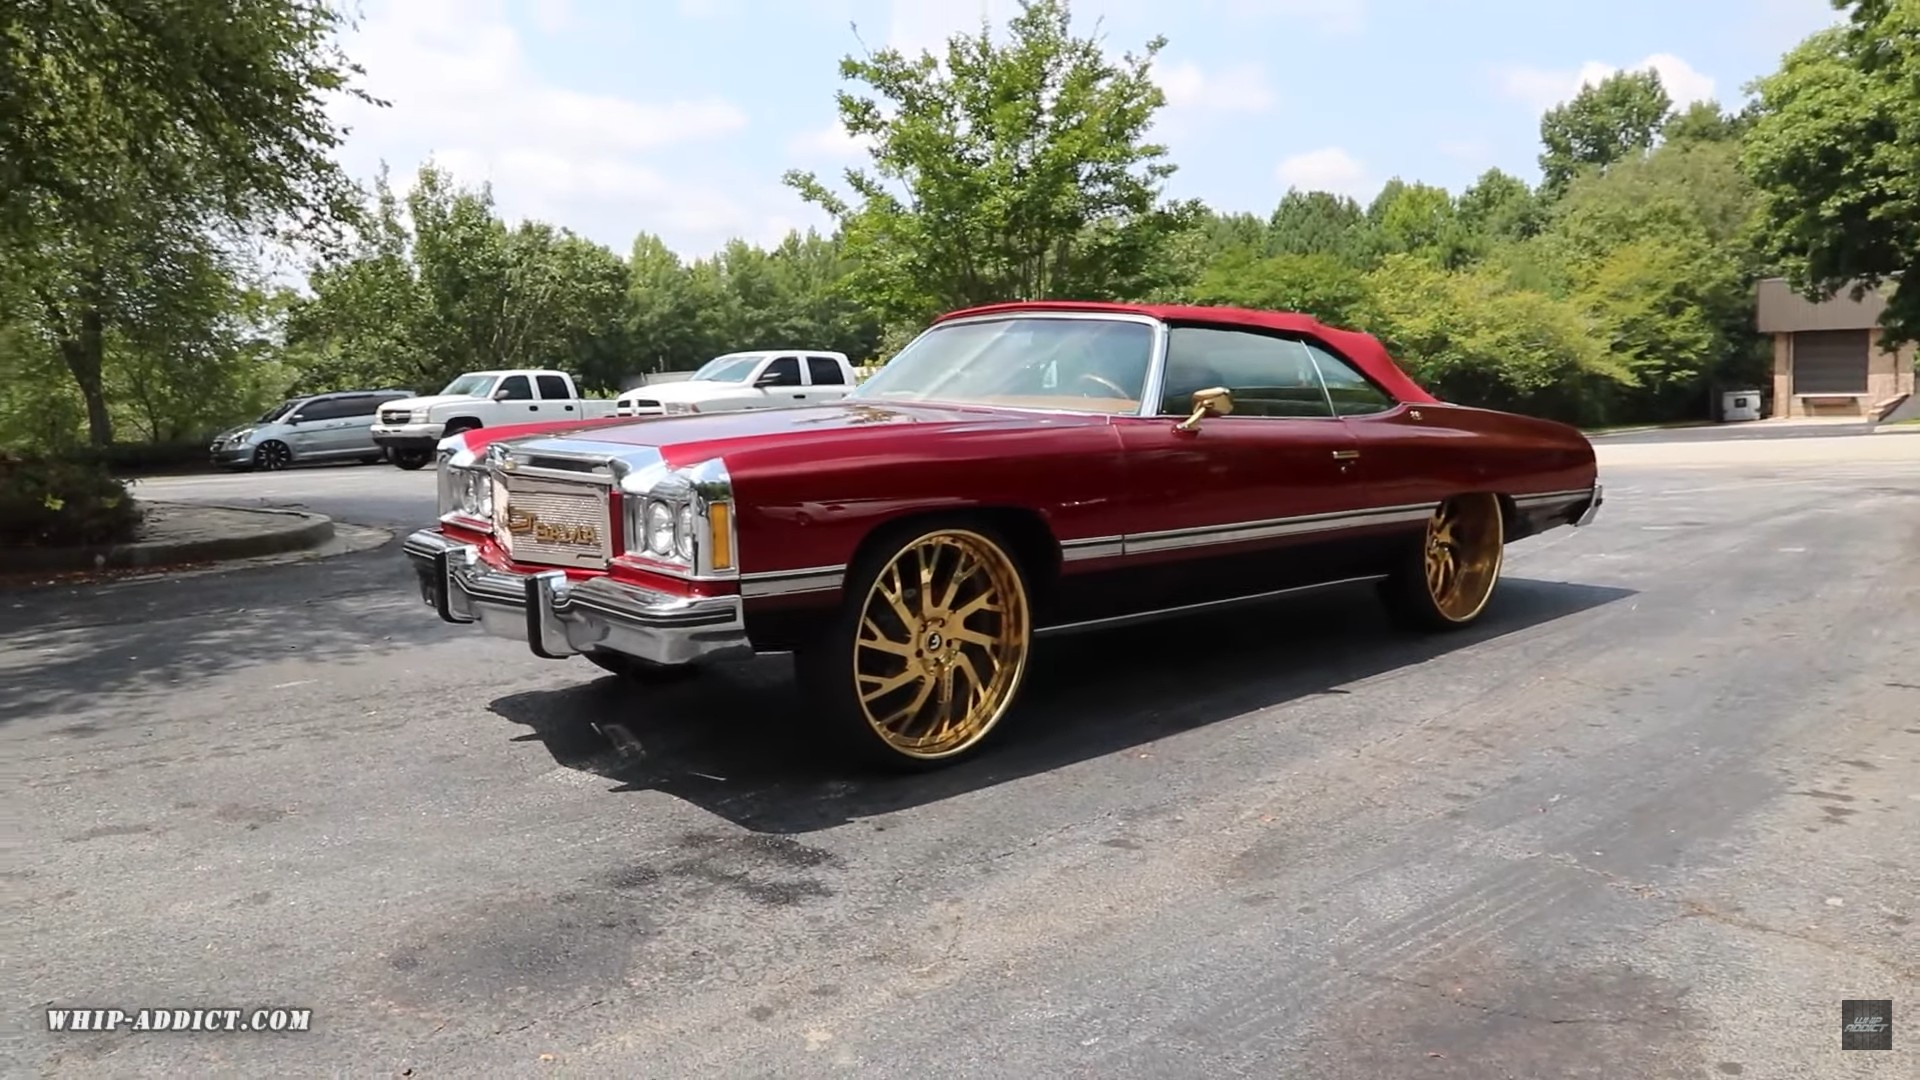 Brandywine 1974 Chevy Caprice Vert on Gold 26s Needs Supercharged LT4  Pampering - autoevolution